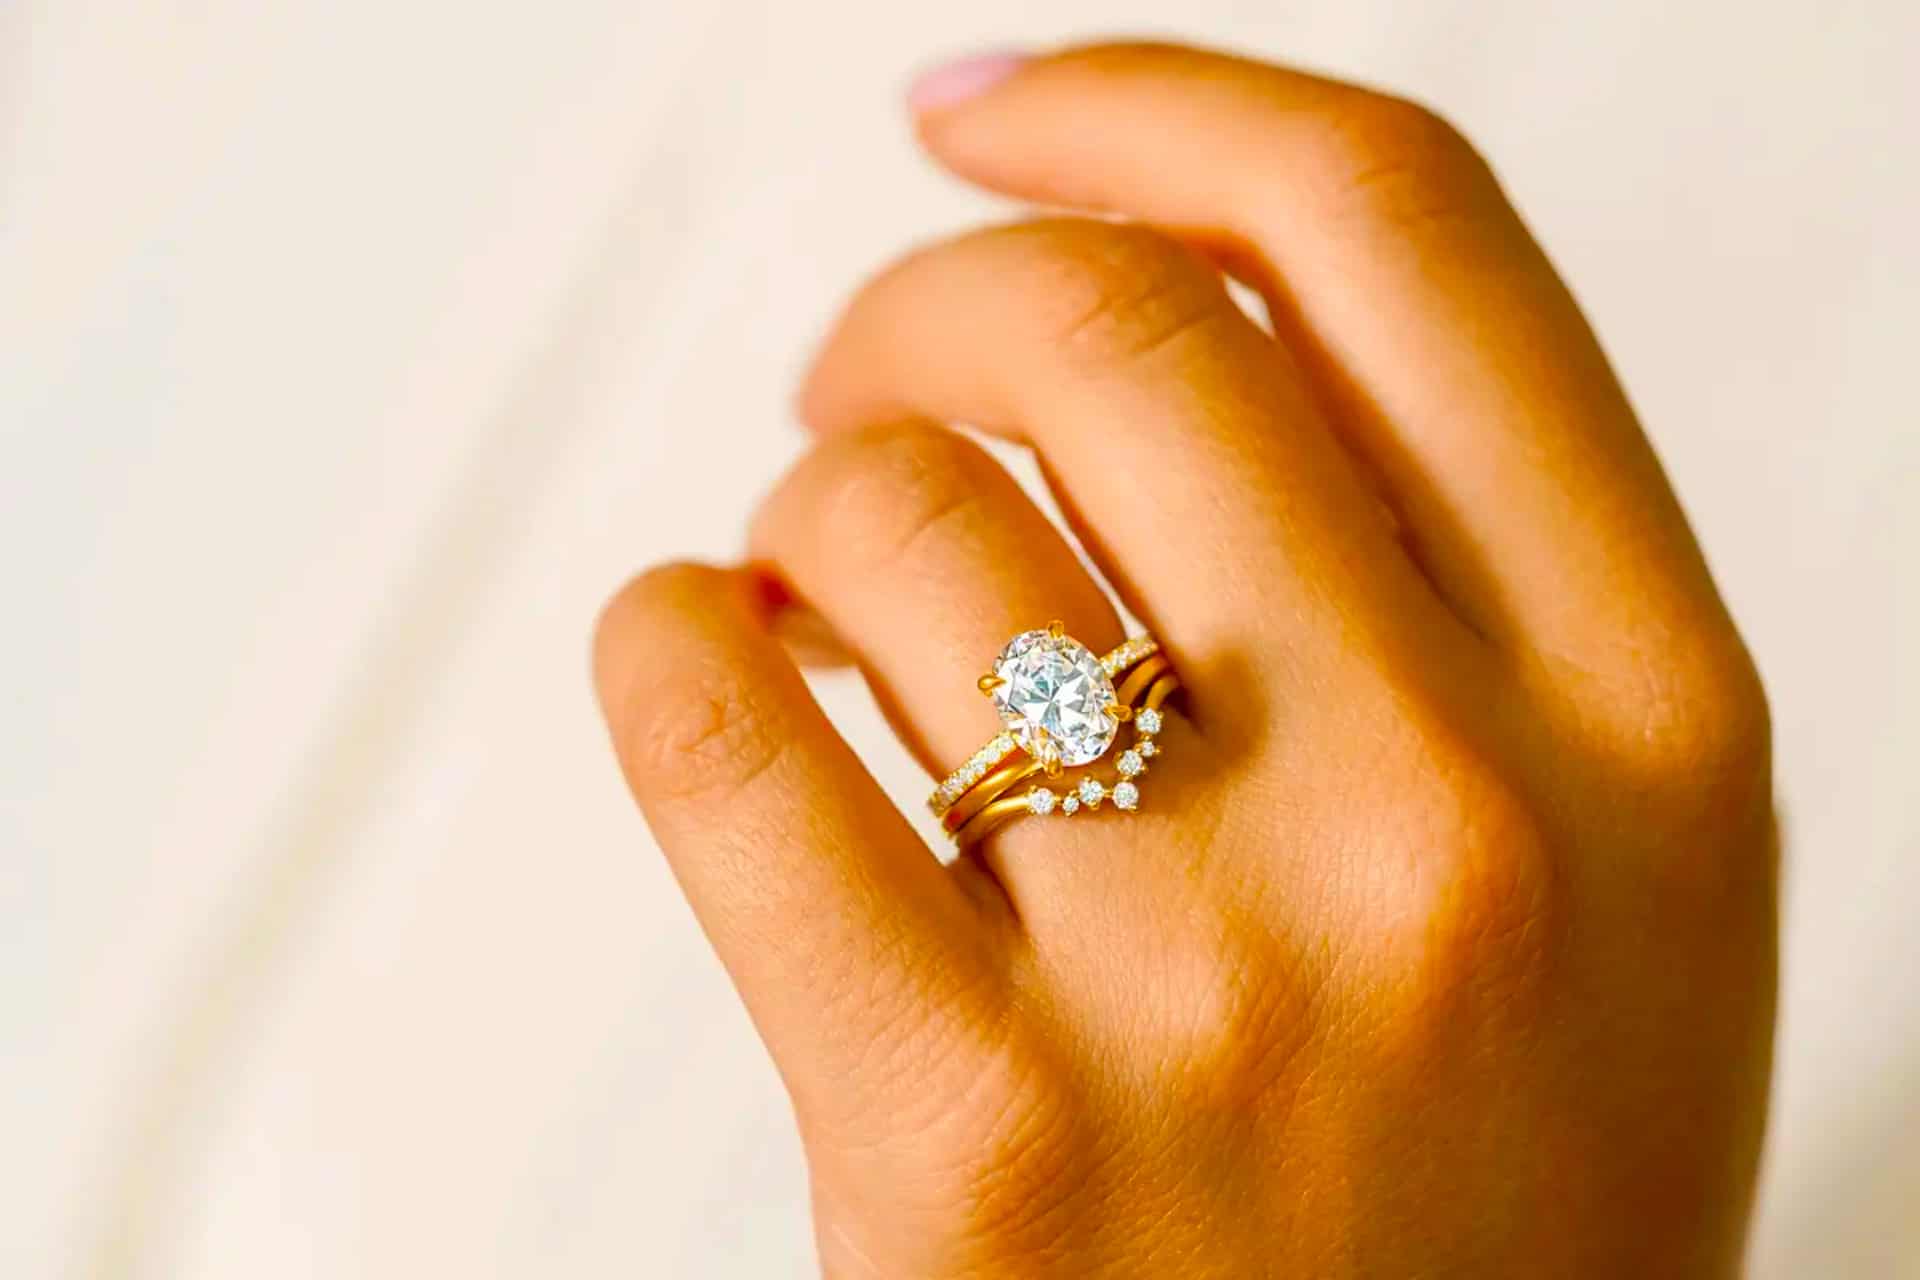 Pearl Engagement Rings: Trend or Modern Classic?